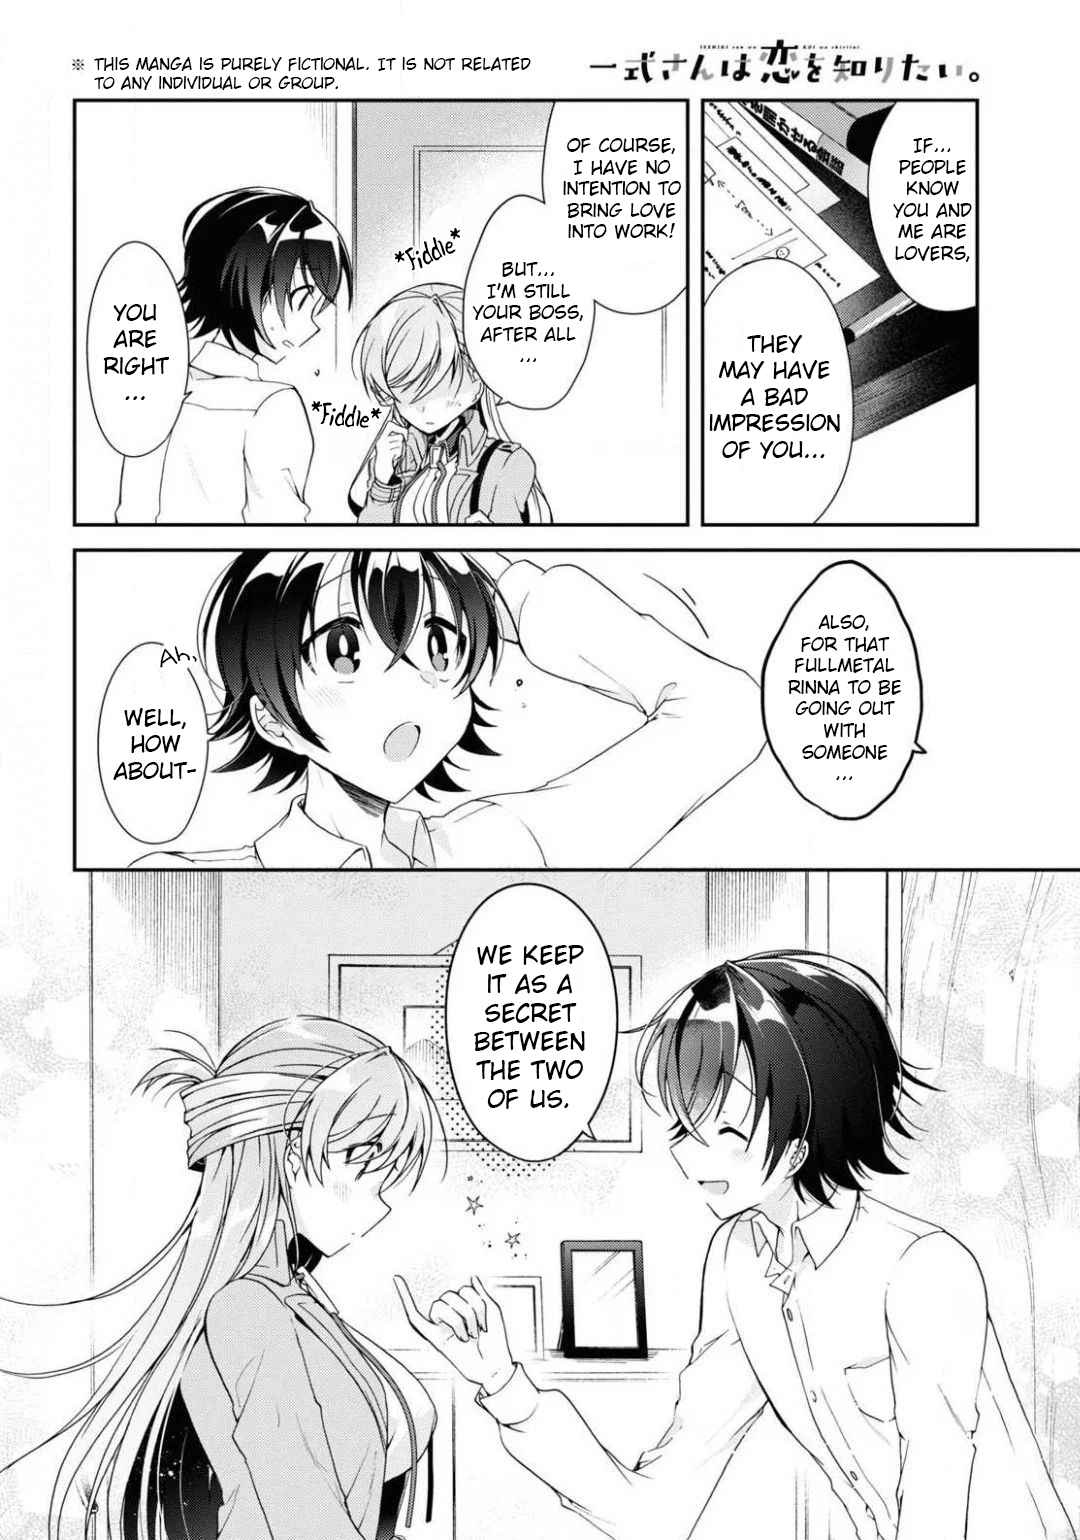 Isshiki-san Wants to Know About Love. - chapter 4 - #2